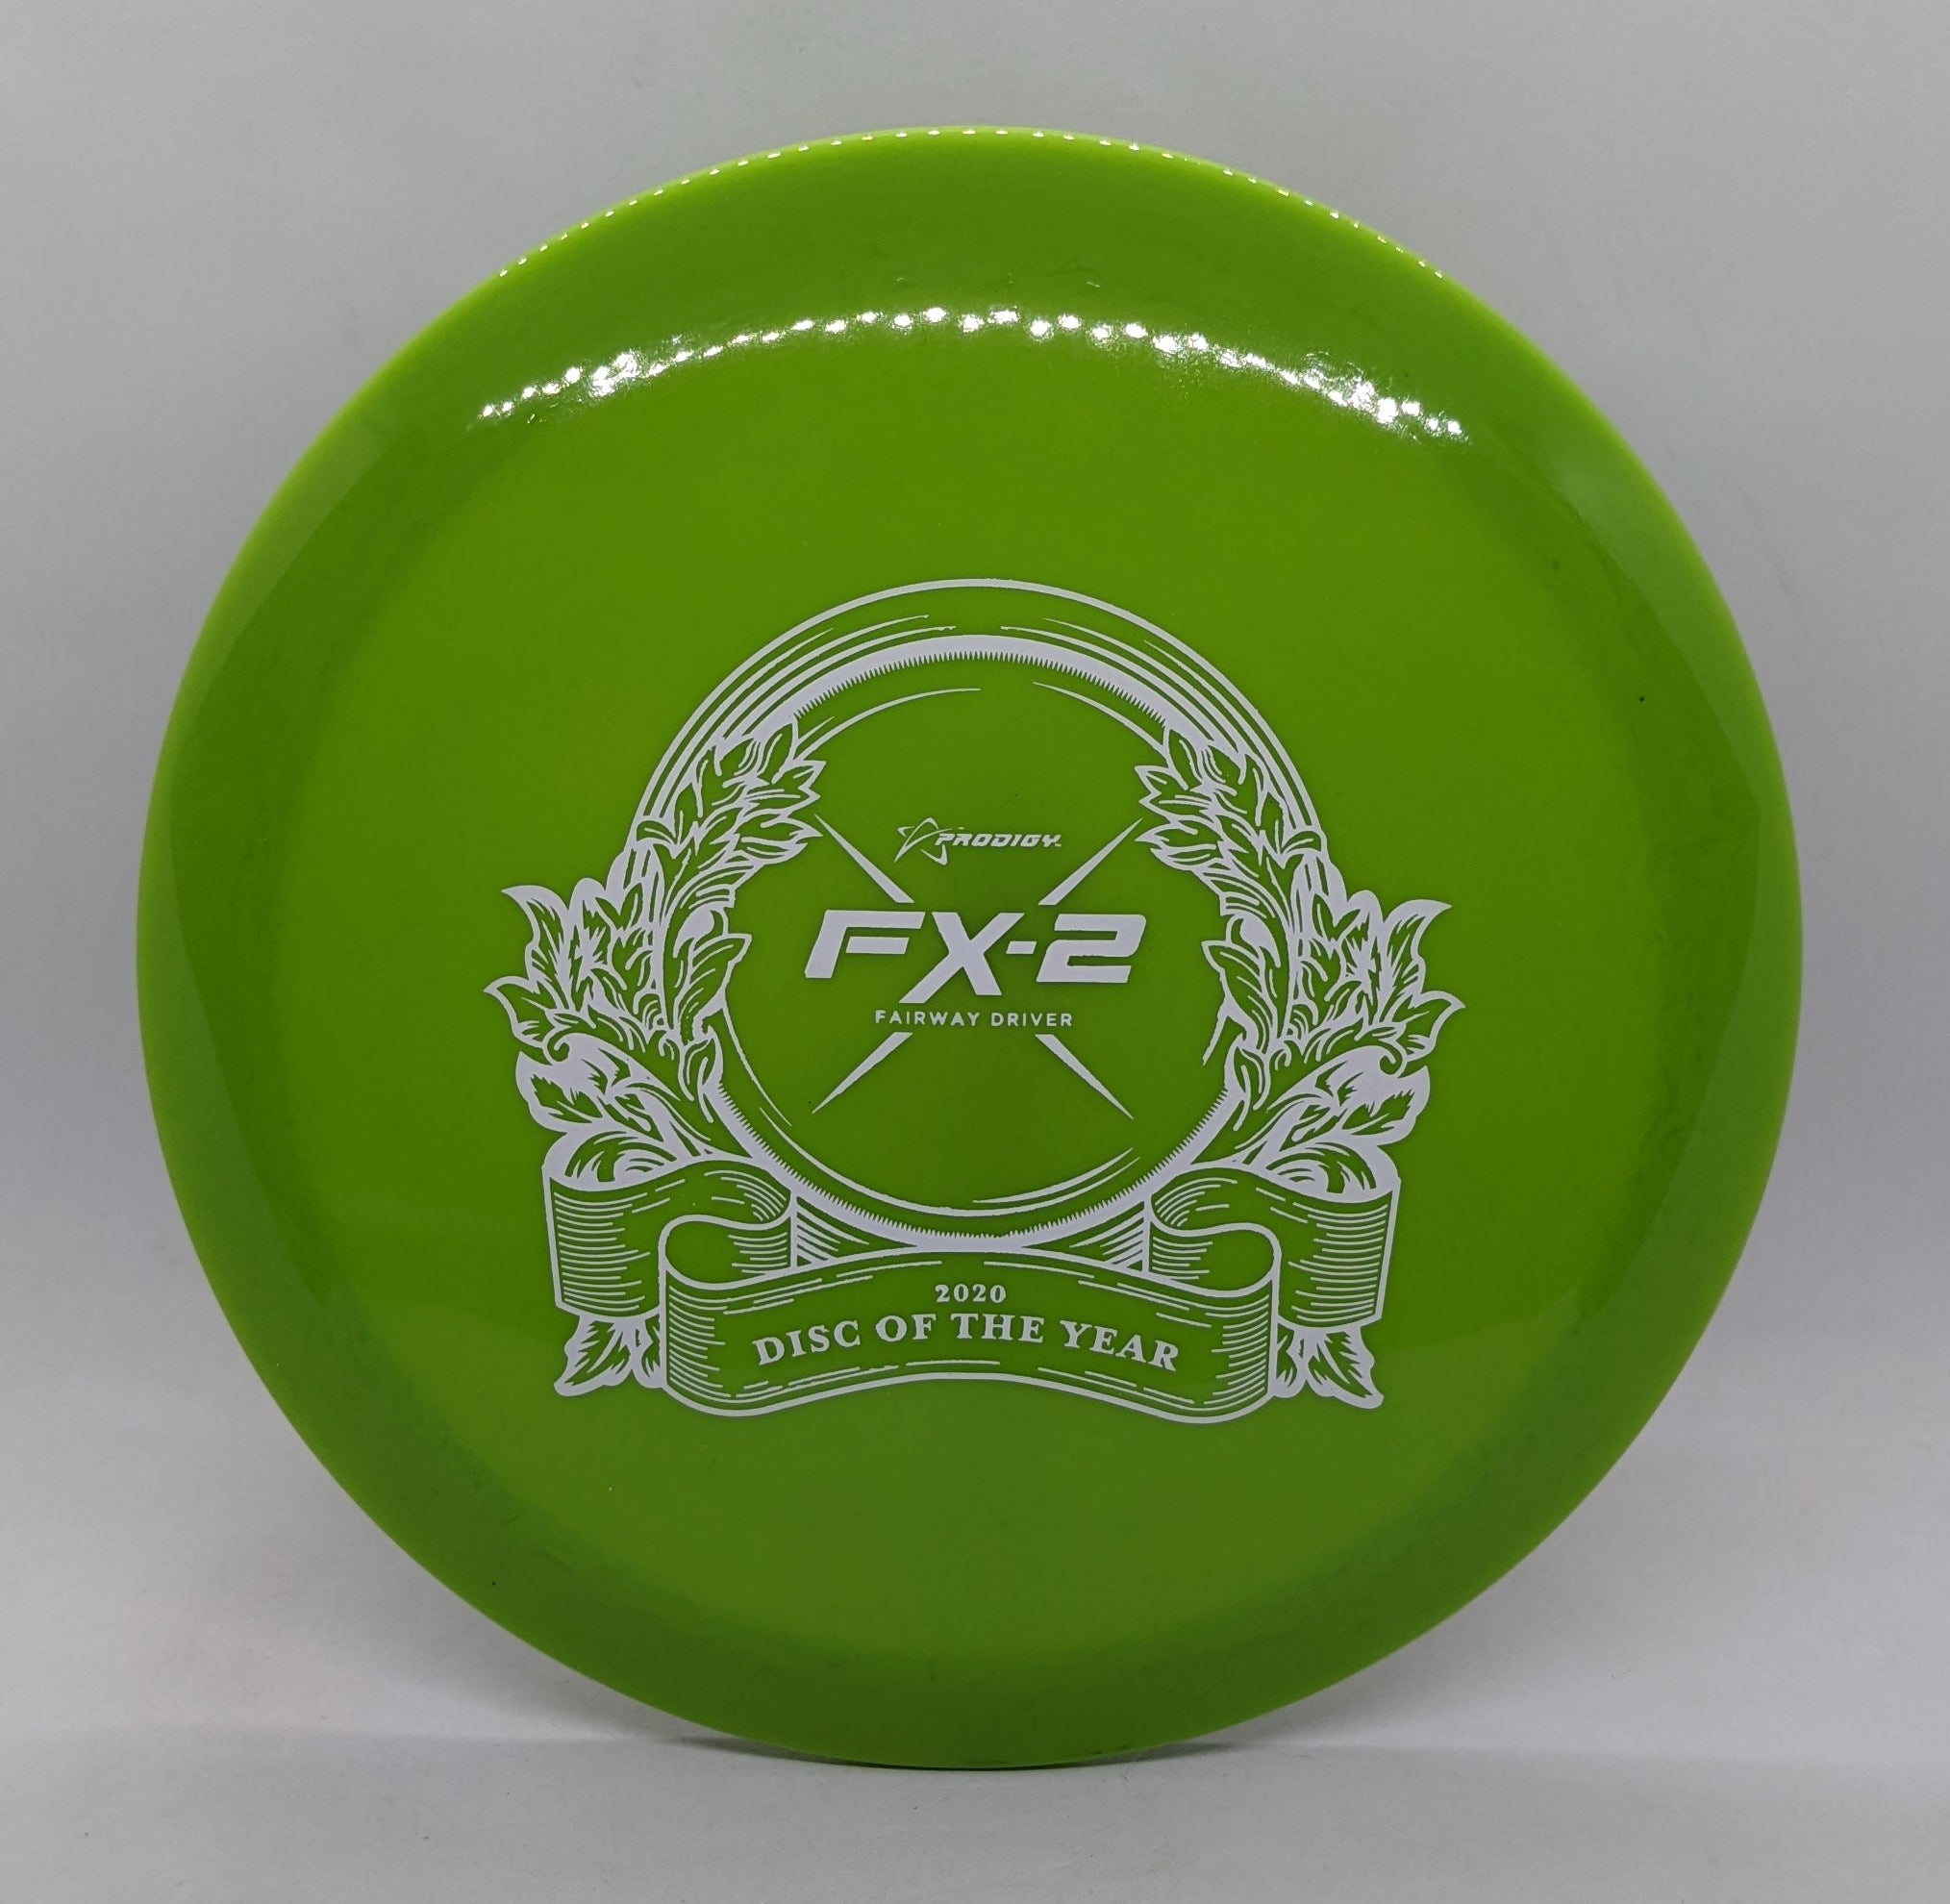 Prodigy FX-2 400G 2020 Disc of the Year Stamp